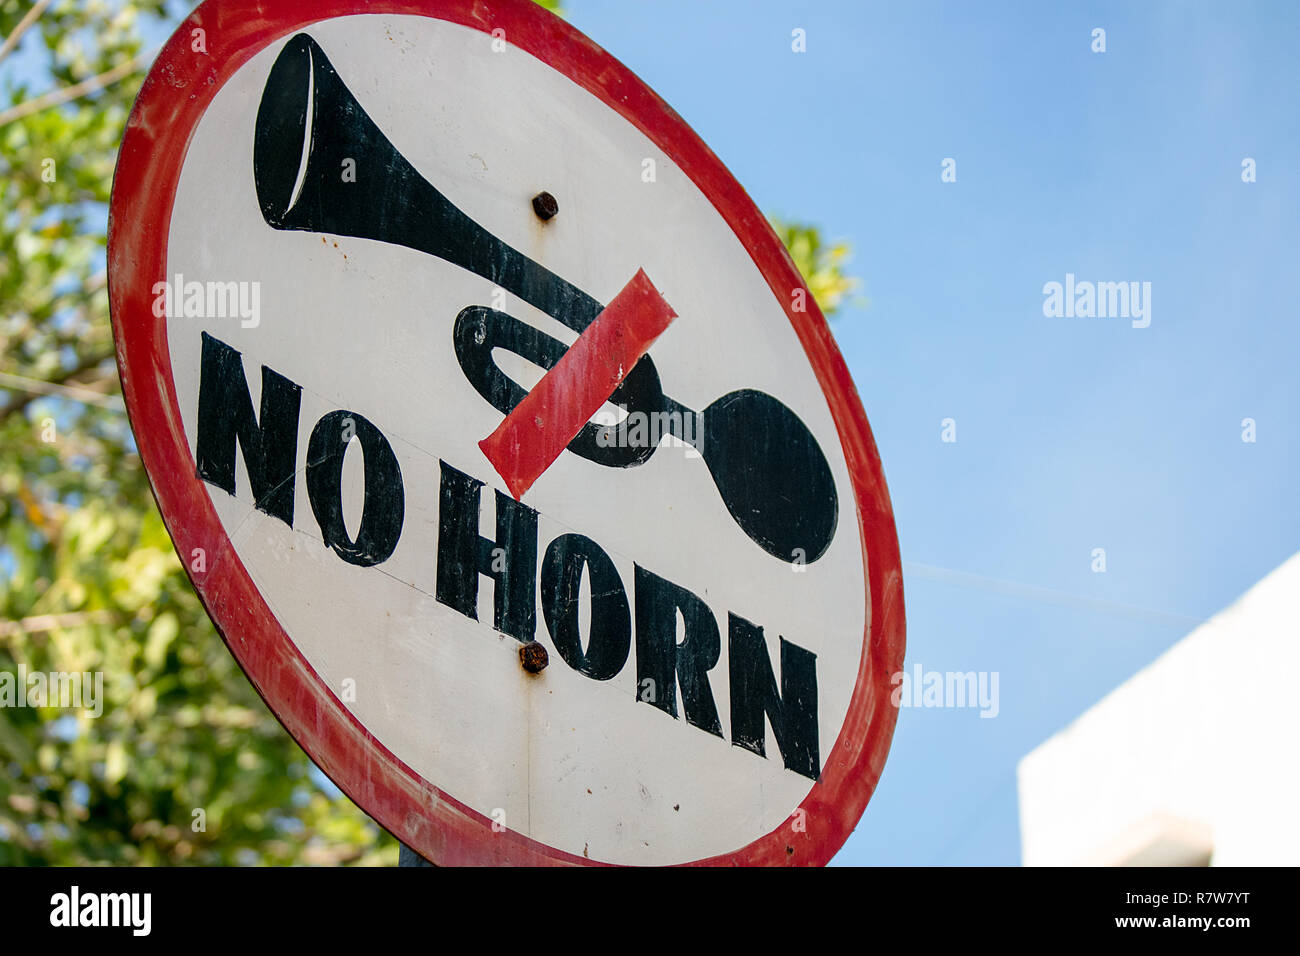 In an attempt to reduce noise pollution from car horns, official hand painted No Horn warning signs are installed around cites in India. Stock Photo